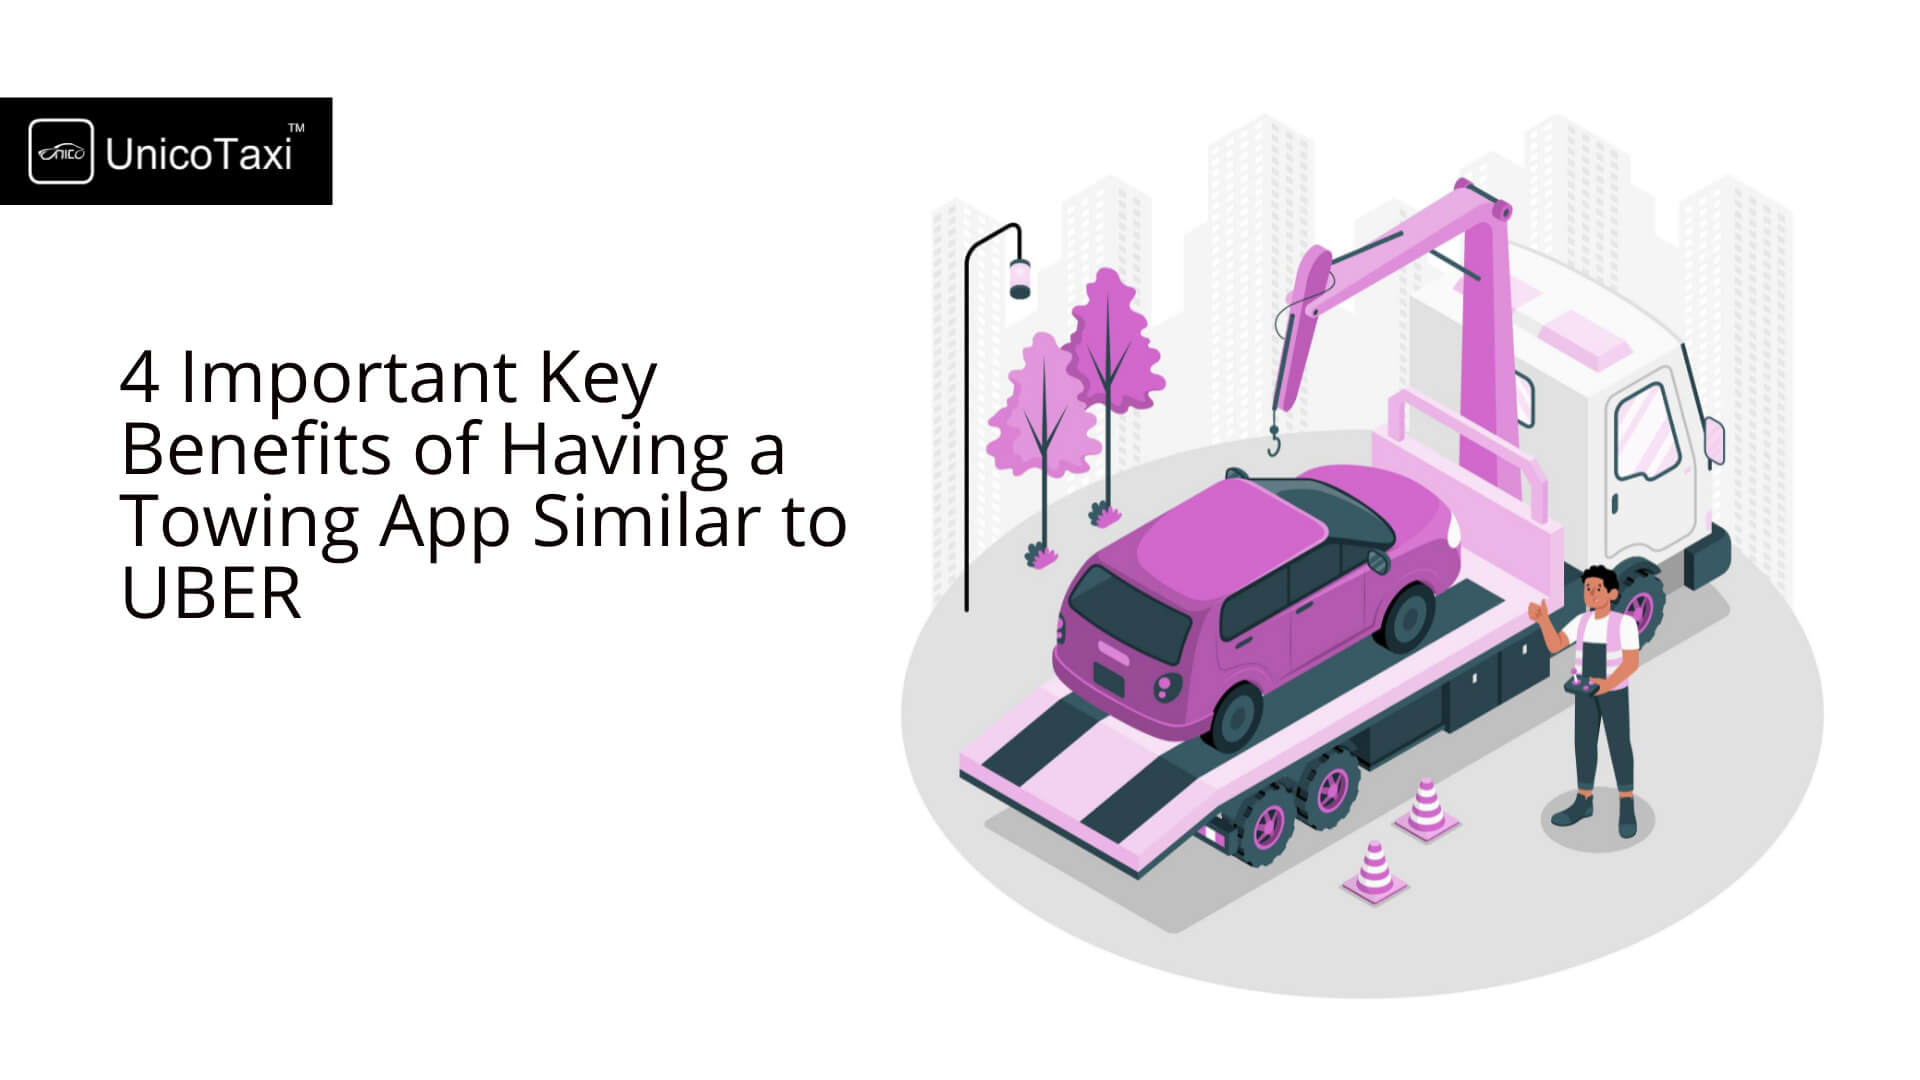 4 Important Key Benefits of Having a Towing App Similar to UBER